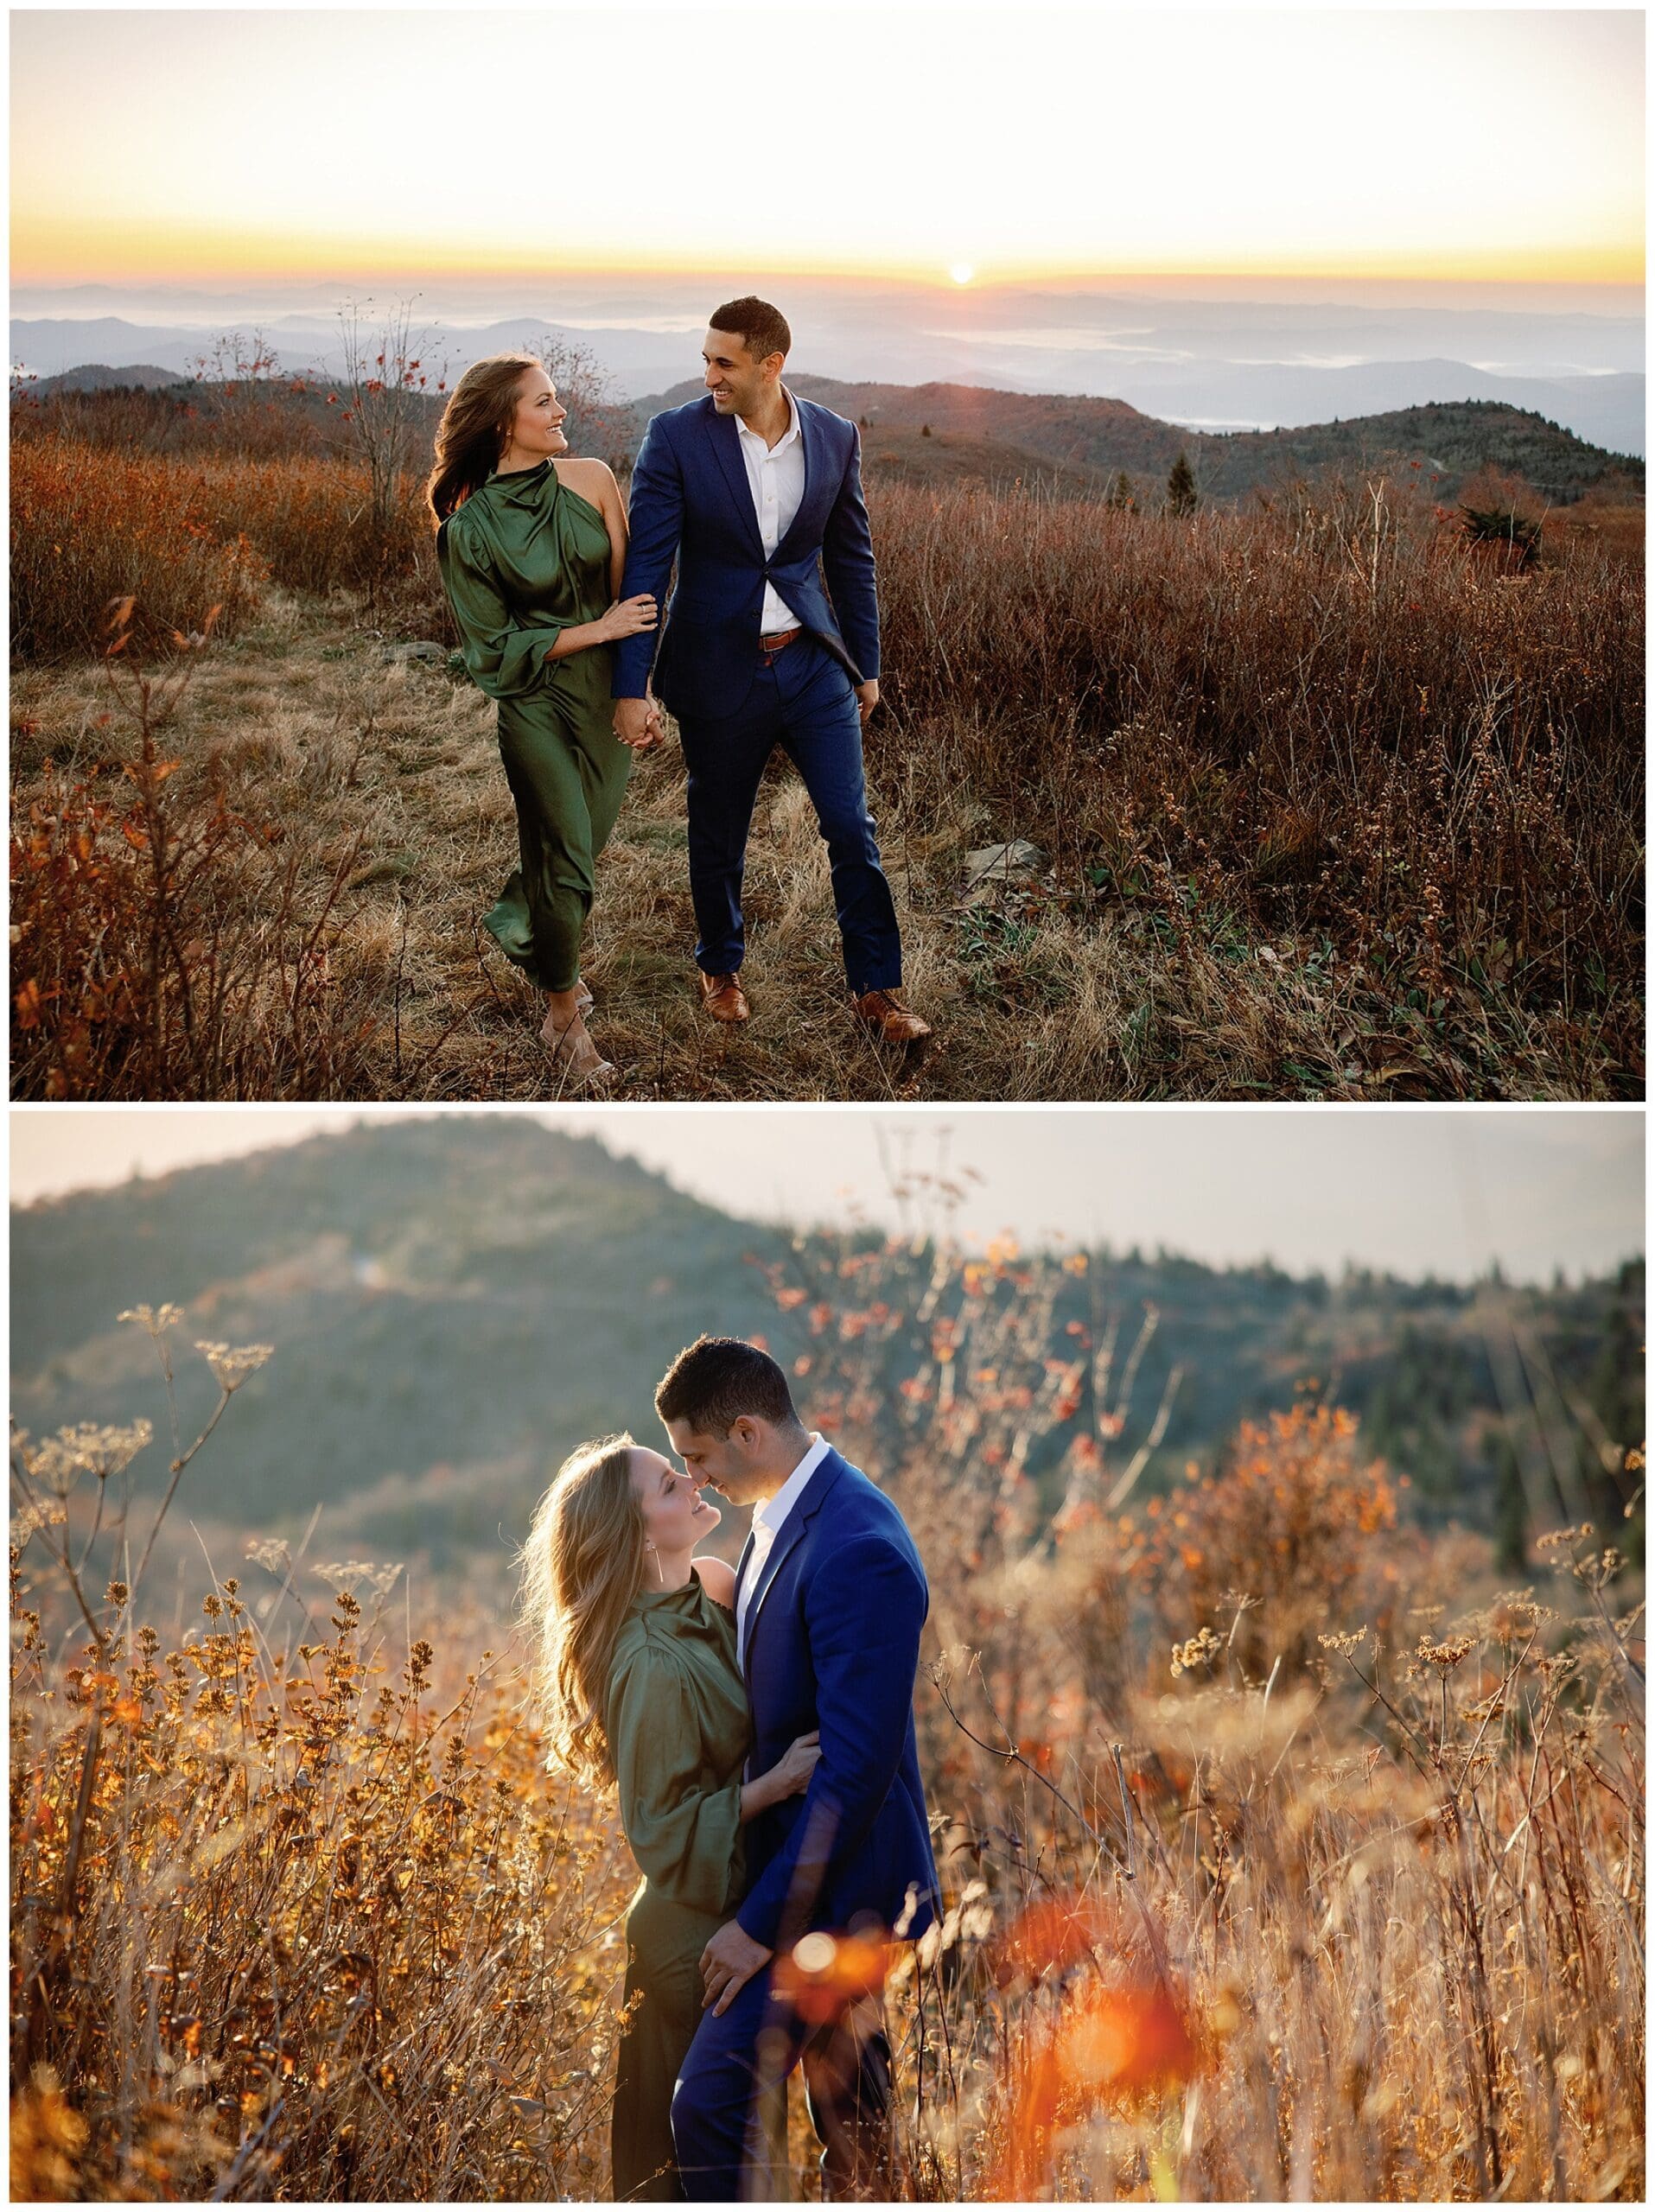 with the couple gazing lovingly at each other amidst the rugged landscape. This sets the tone for their adventurous and romantic engagement session.